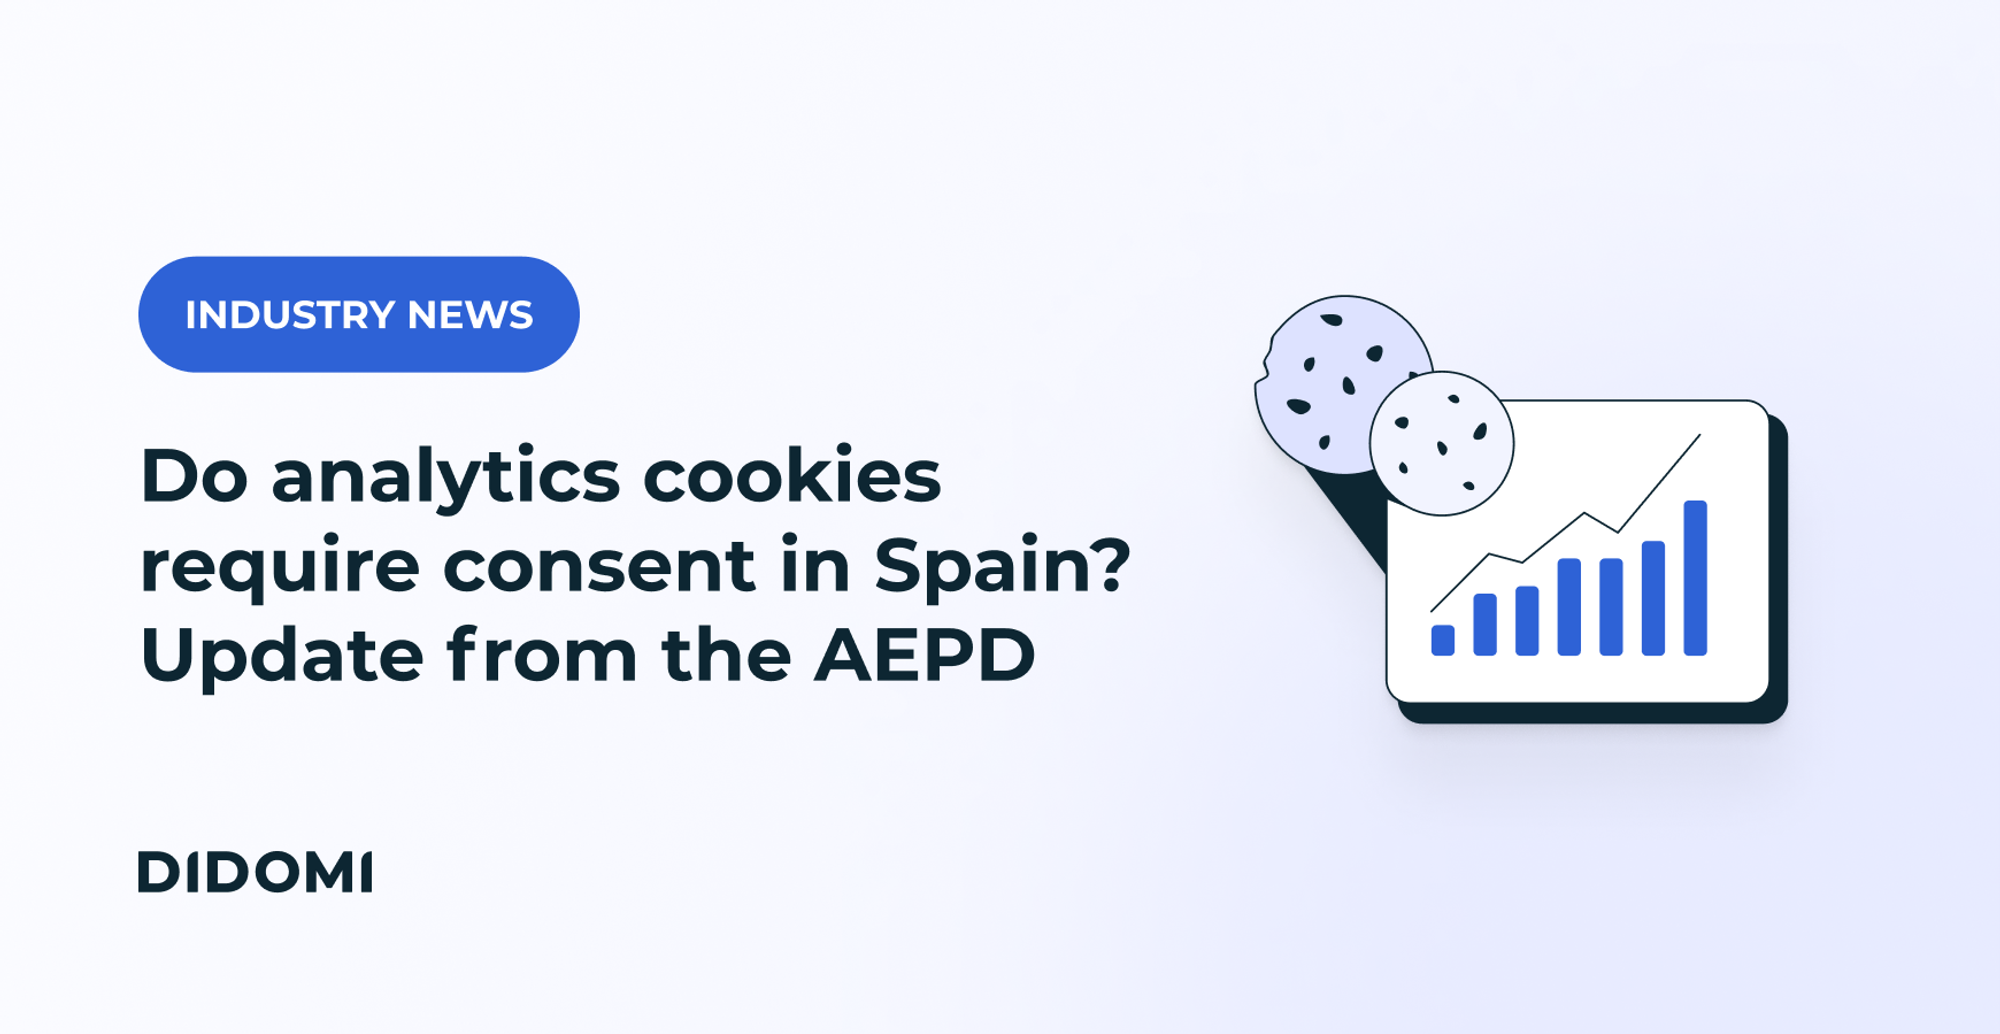 Drawing of a chart with cookies, along with the title "Do analytics cookies require consent in Spain? Update from the AEPD" and the label "industry news"